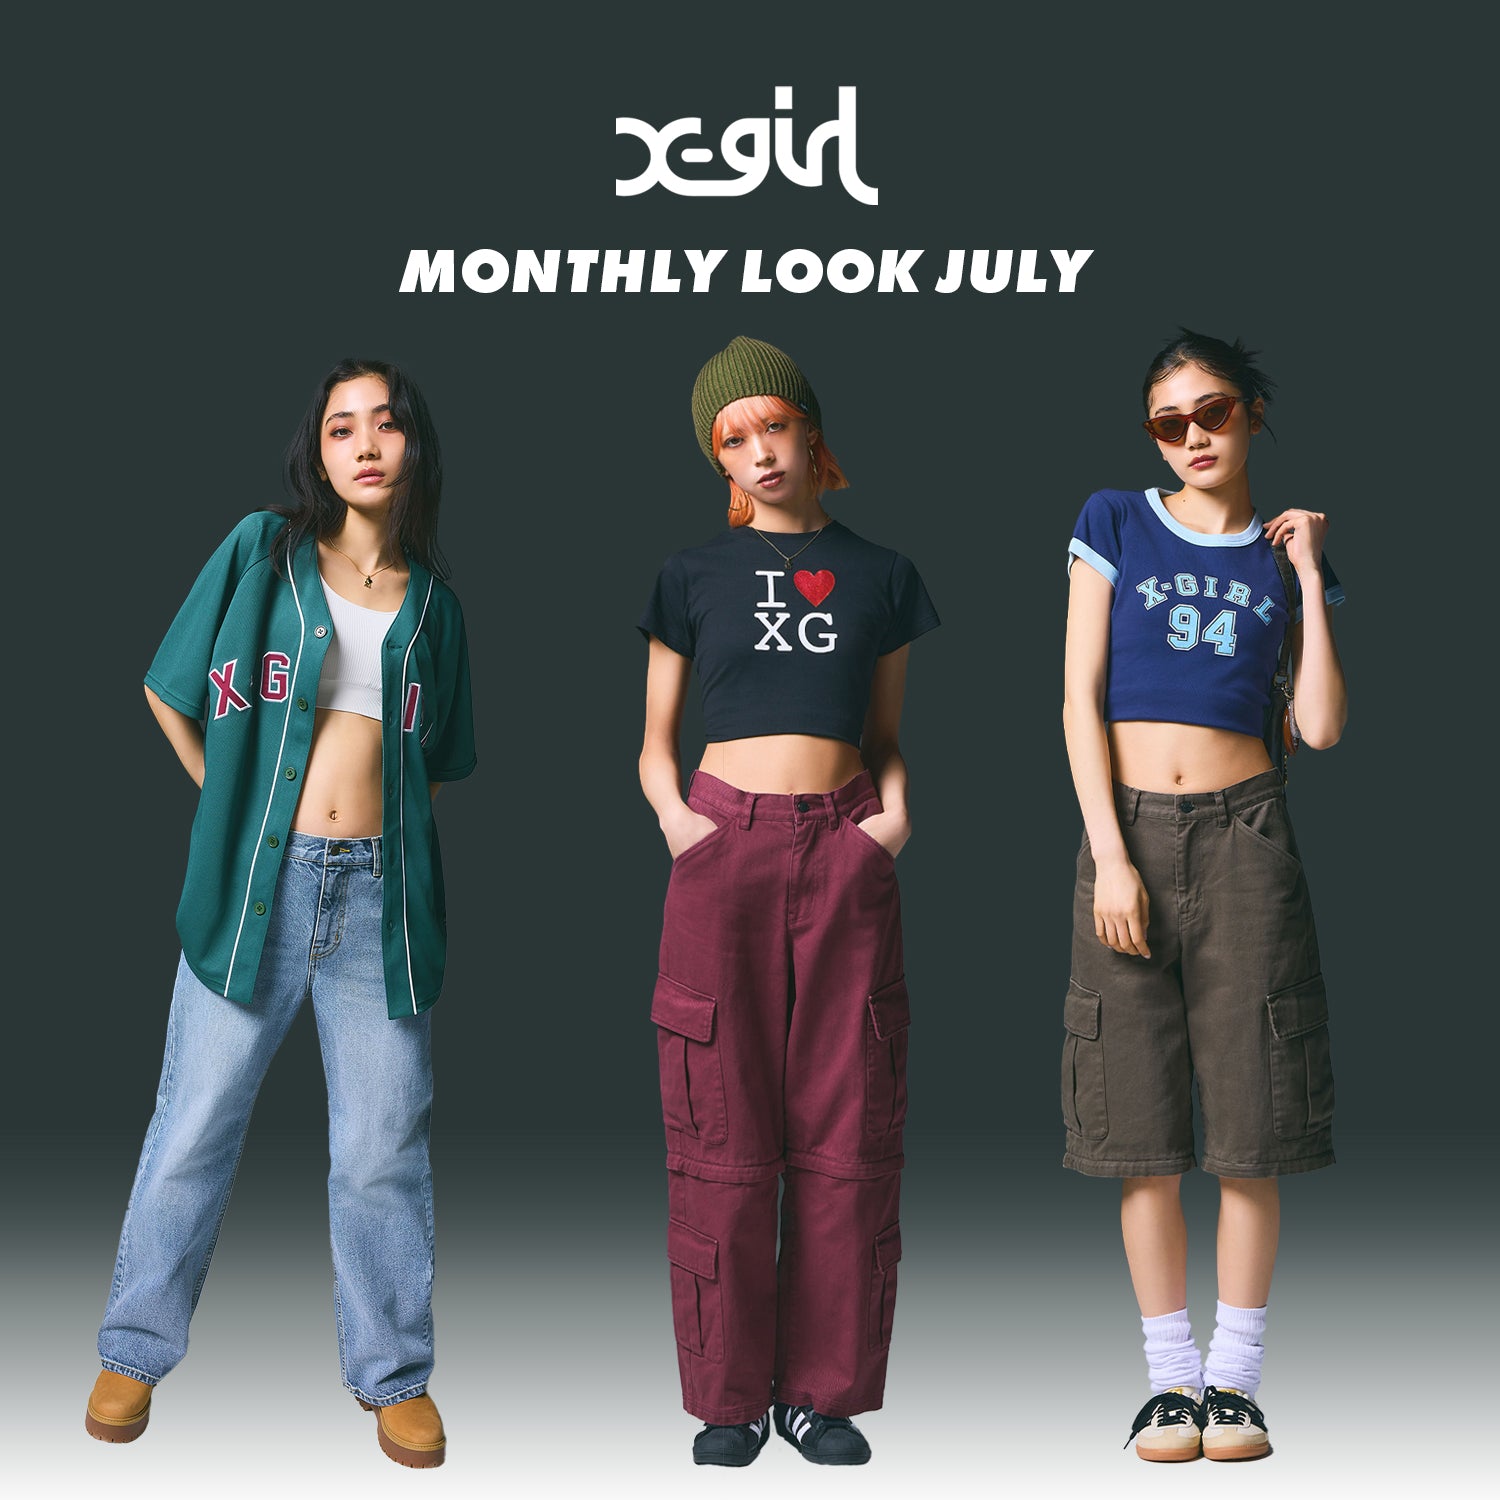 MONTHLY LOOK JULY